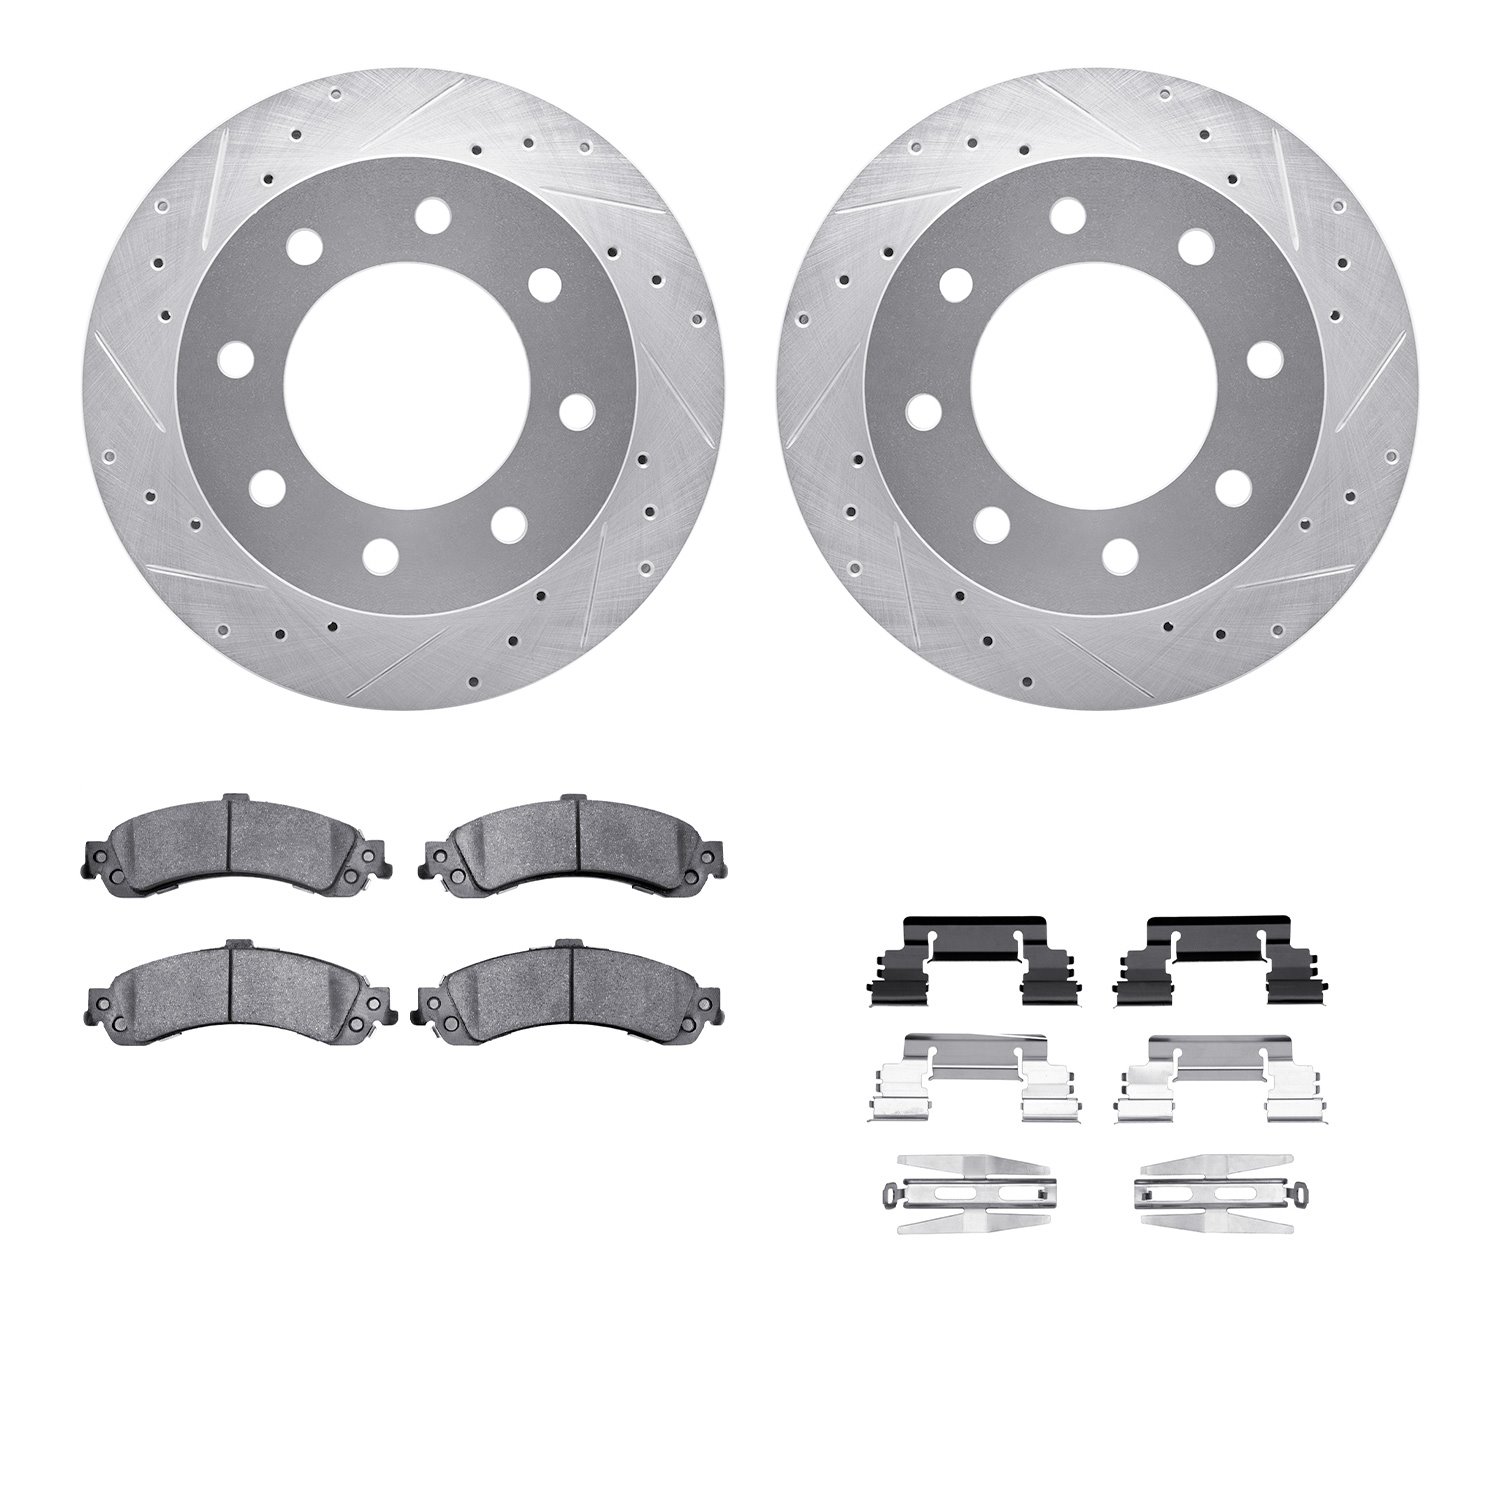 7412-48033 Drilled/Slotted Brake Rotors with Ultimate-Duty Brake Pads Kit & Hardware [Silver], 2005-2005 GM, Position: Rear